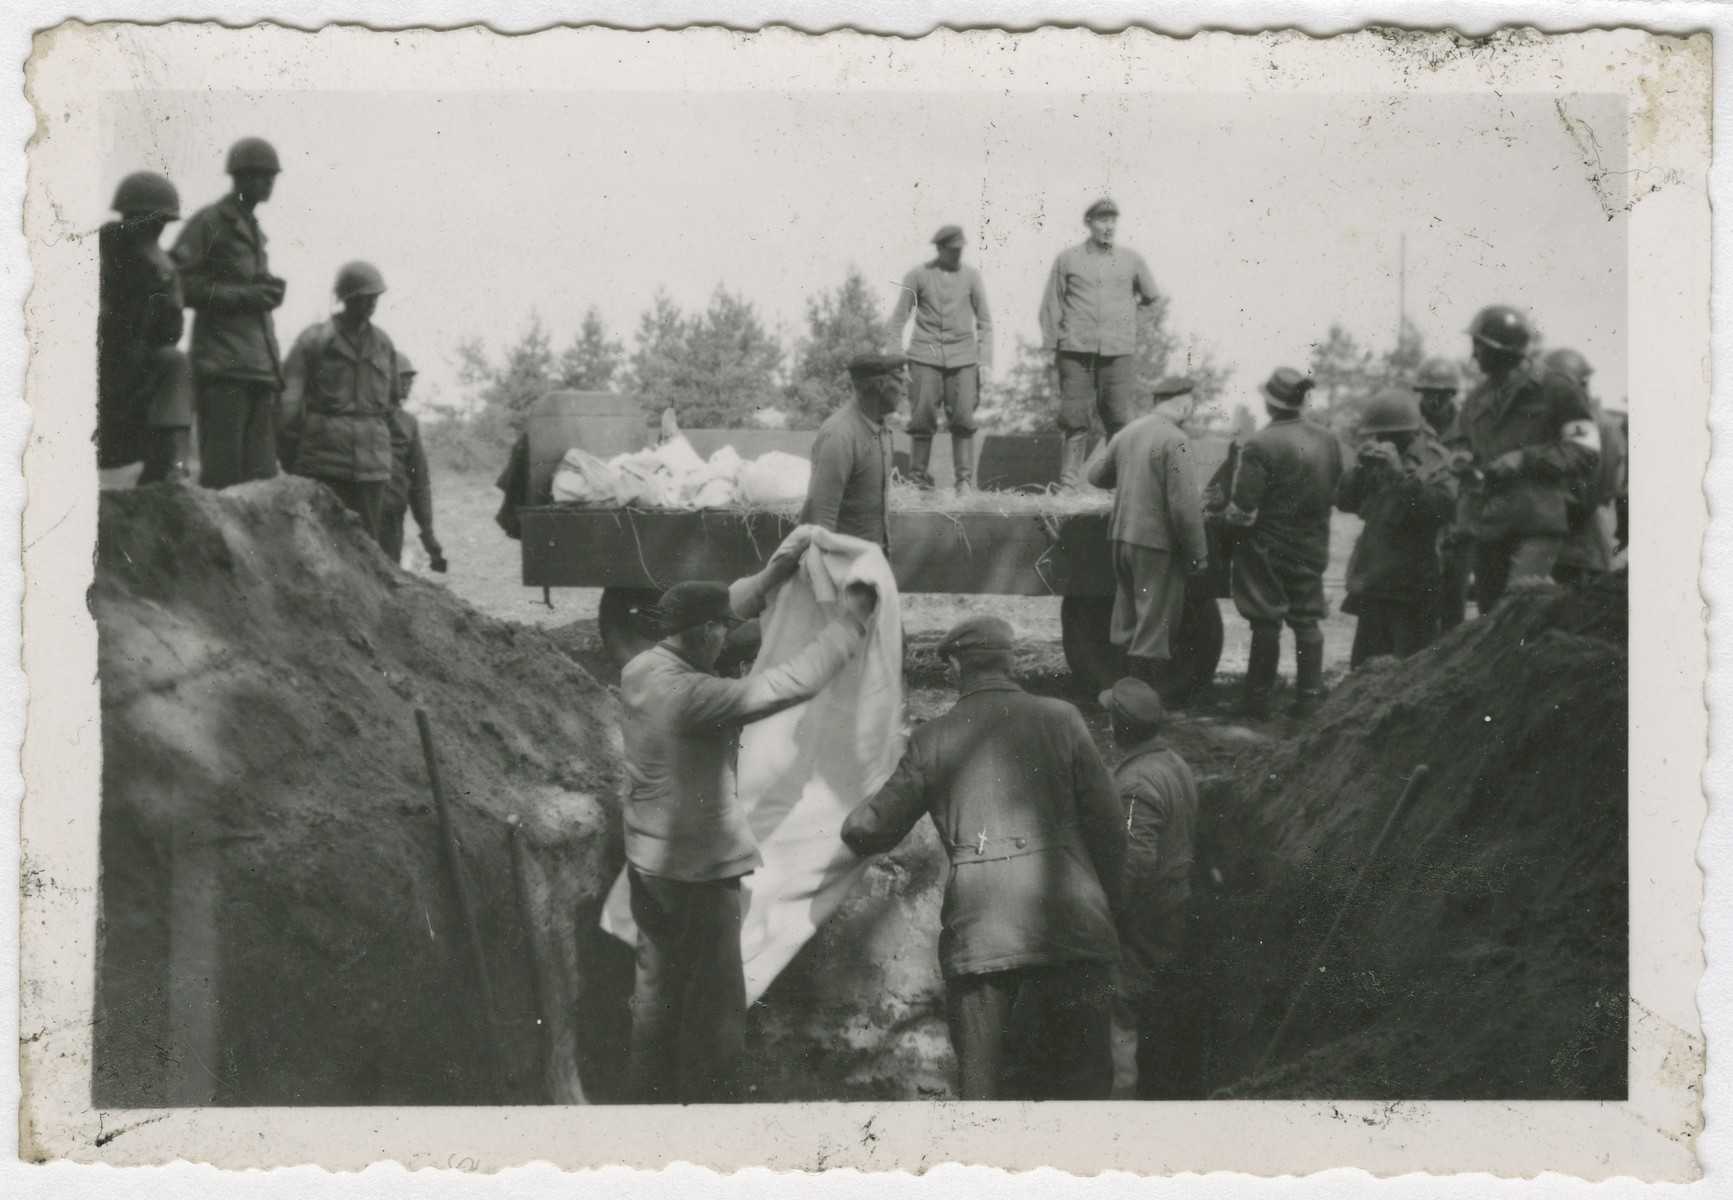 American troops supervise the exhumation for reburial of corpses from a mass grave in either the Buchenwald or Woebbelin concentration camp.